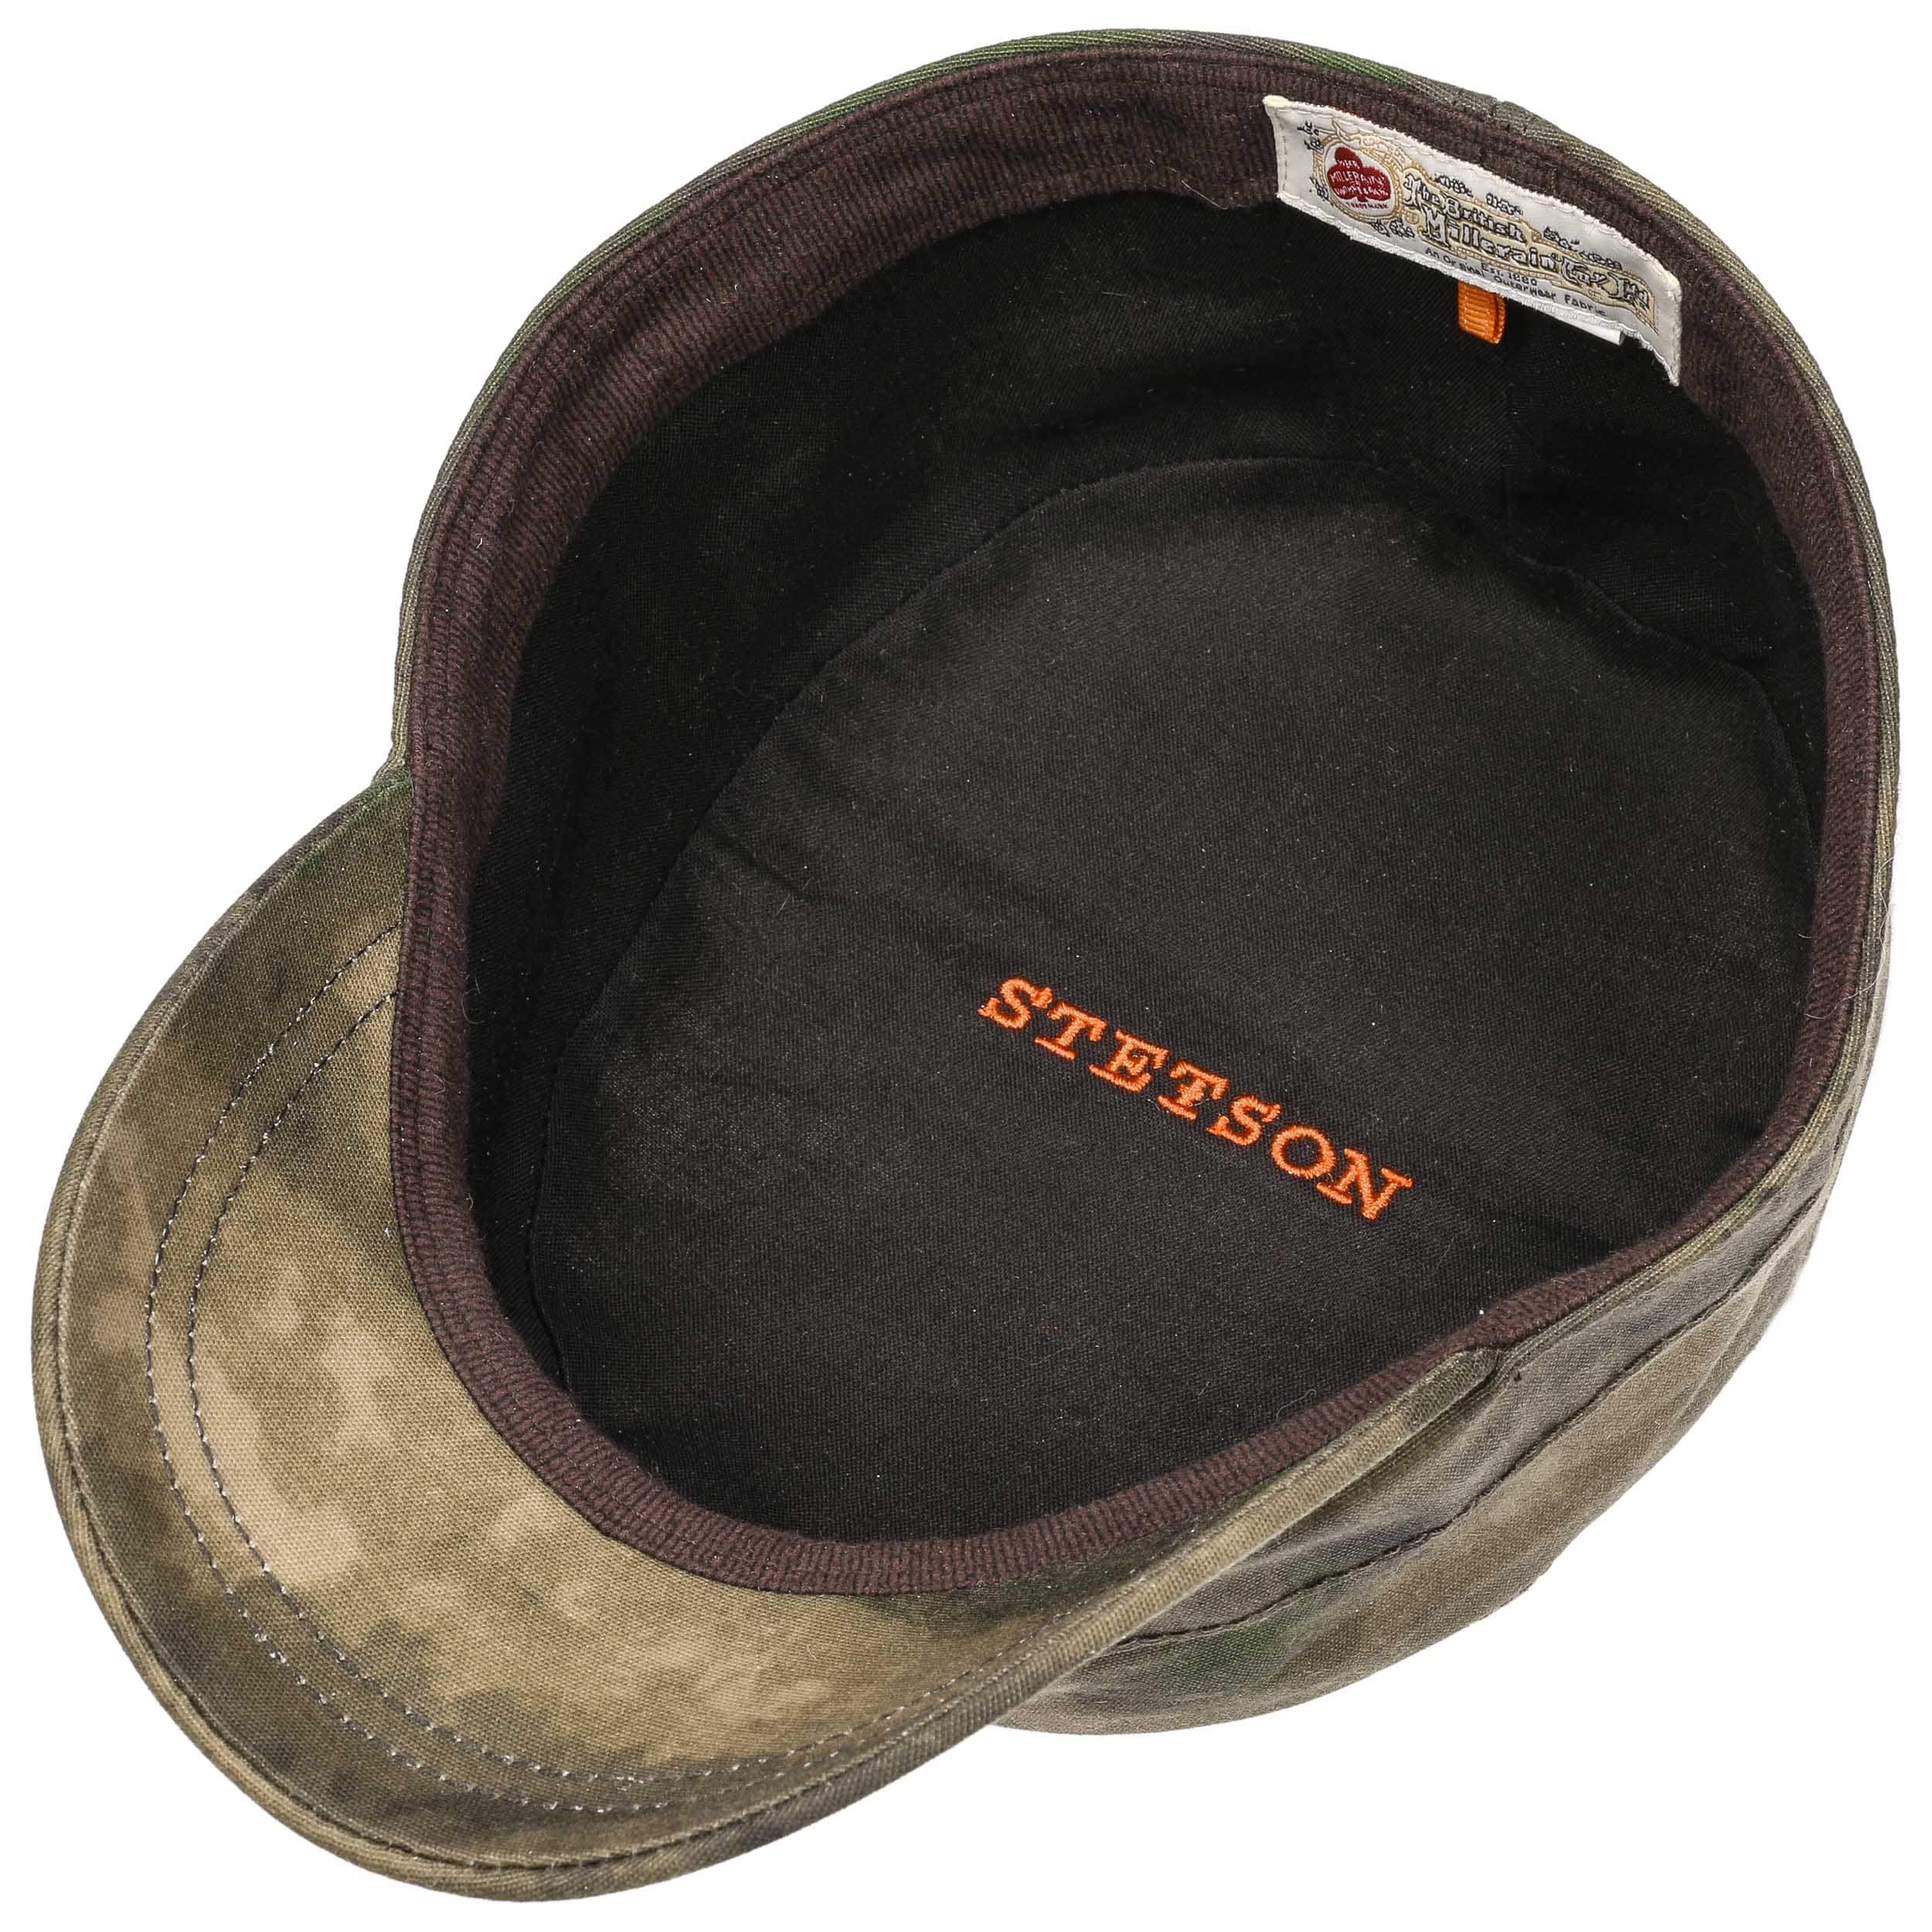 Minnesota Camouflage Army Cap by Stetson - 39,00